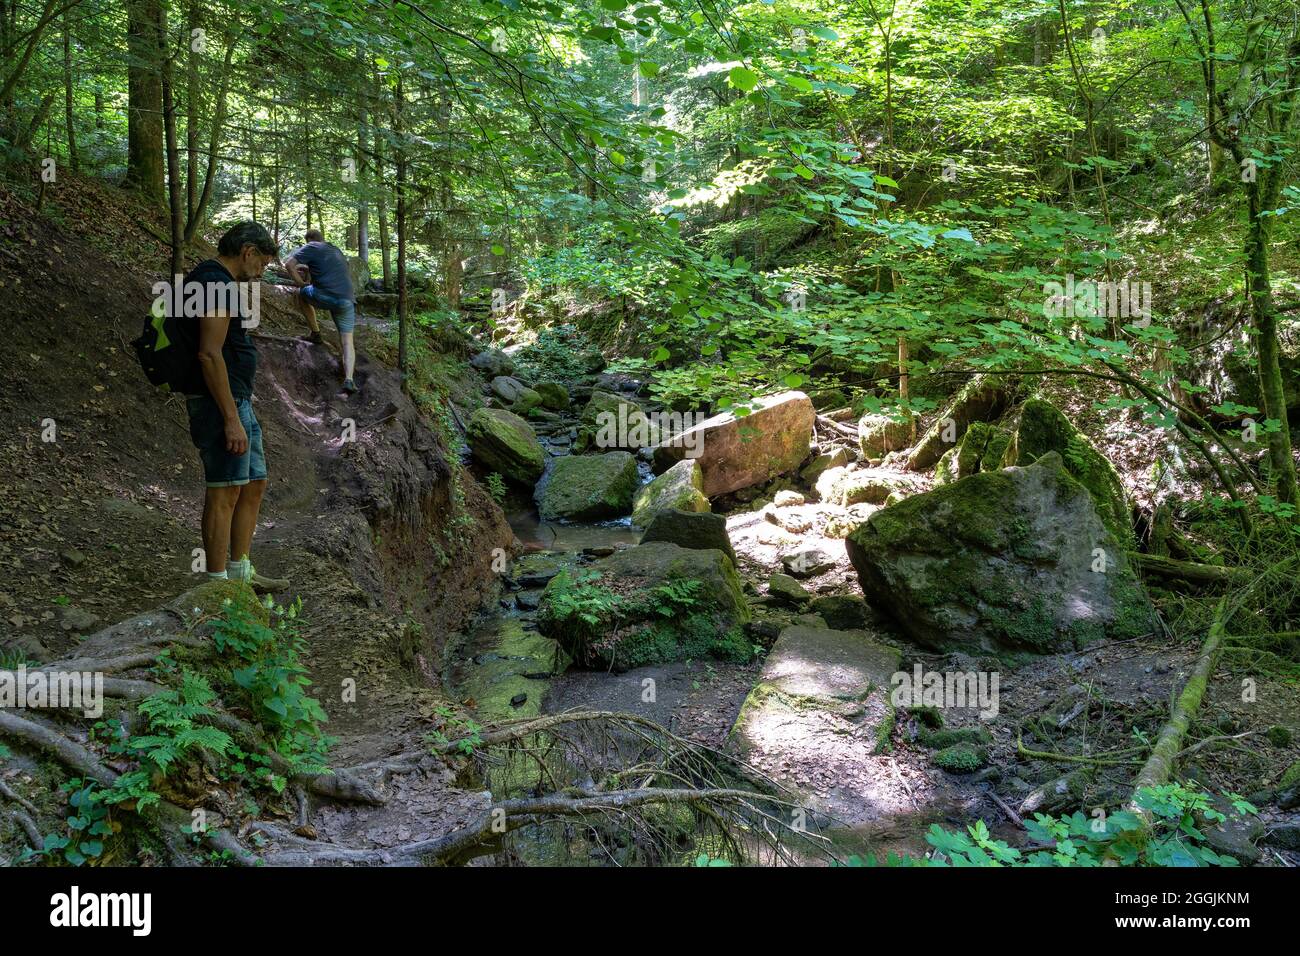 Europe, Germany, Baden-Wuerttemberg, Swabian Forest, Murrhardt, hikers on an impassable path in the Hörschbach Gorge Stock Photo